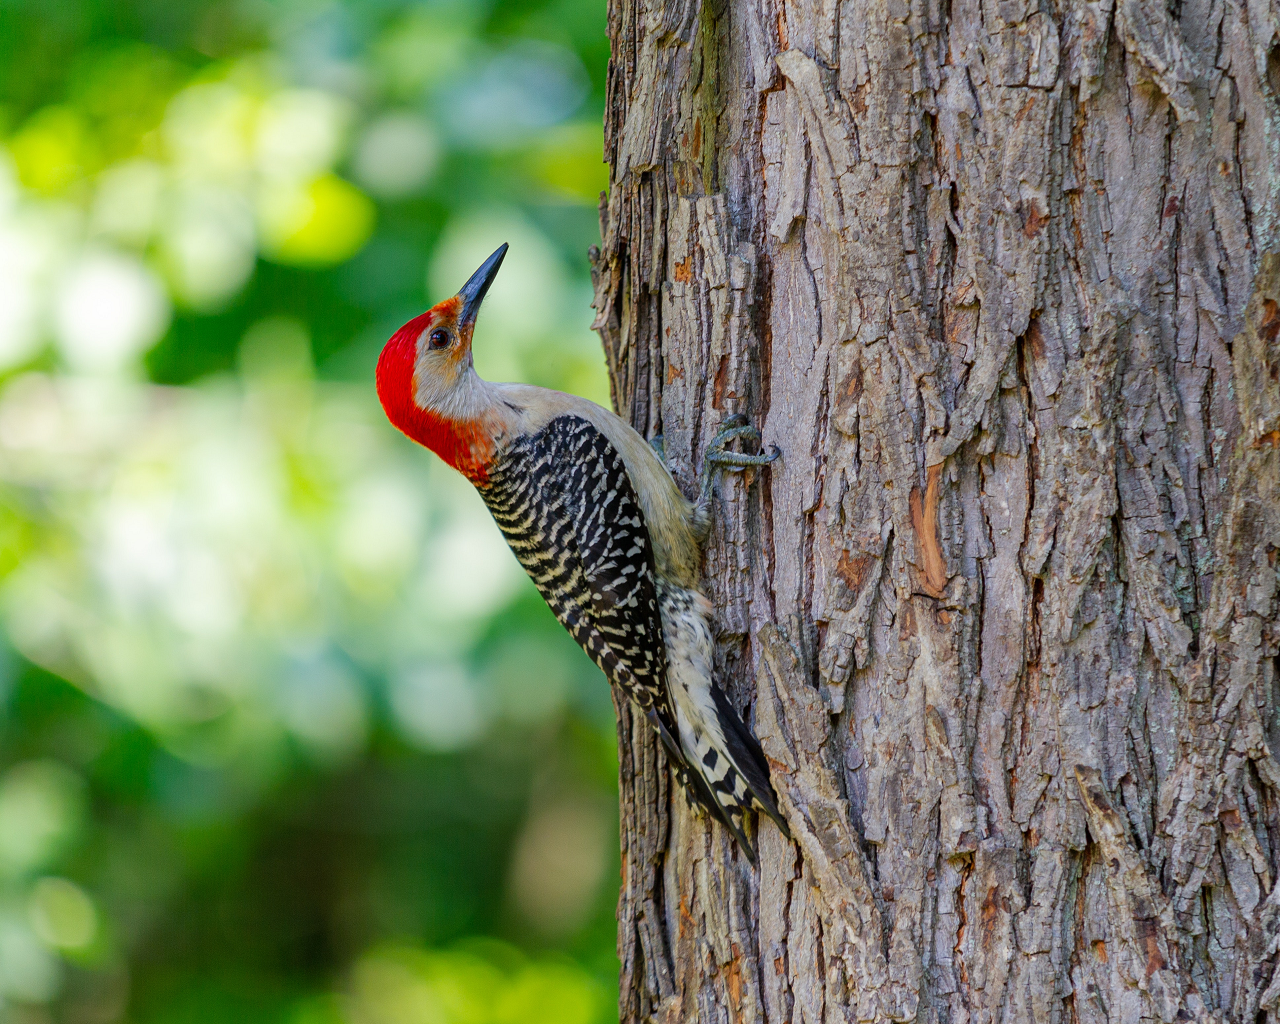 Image of a Red-Bellied Woodpecker perched.